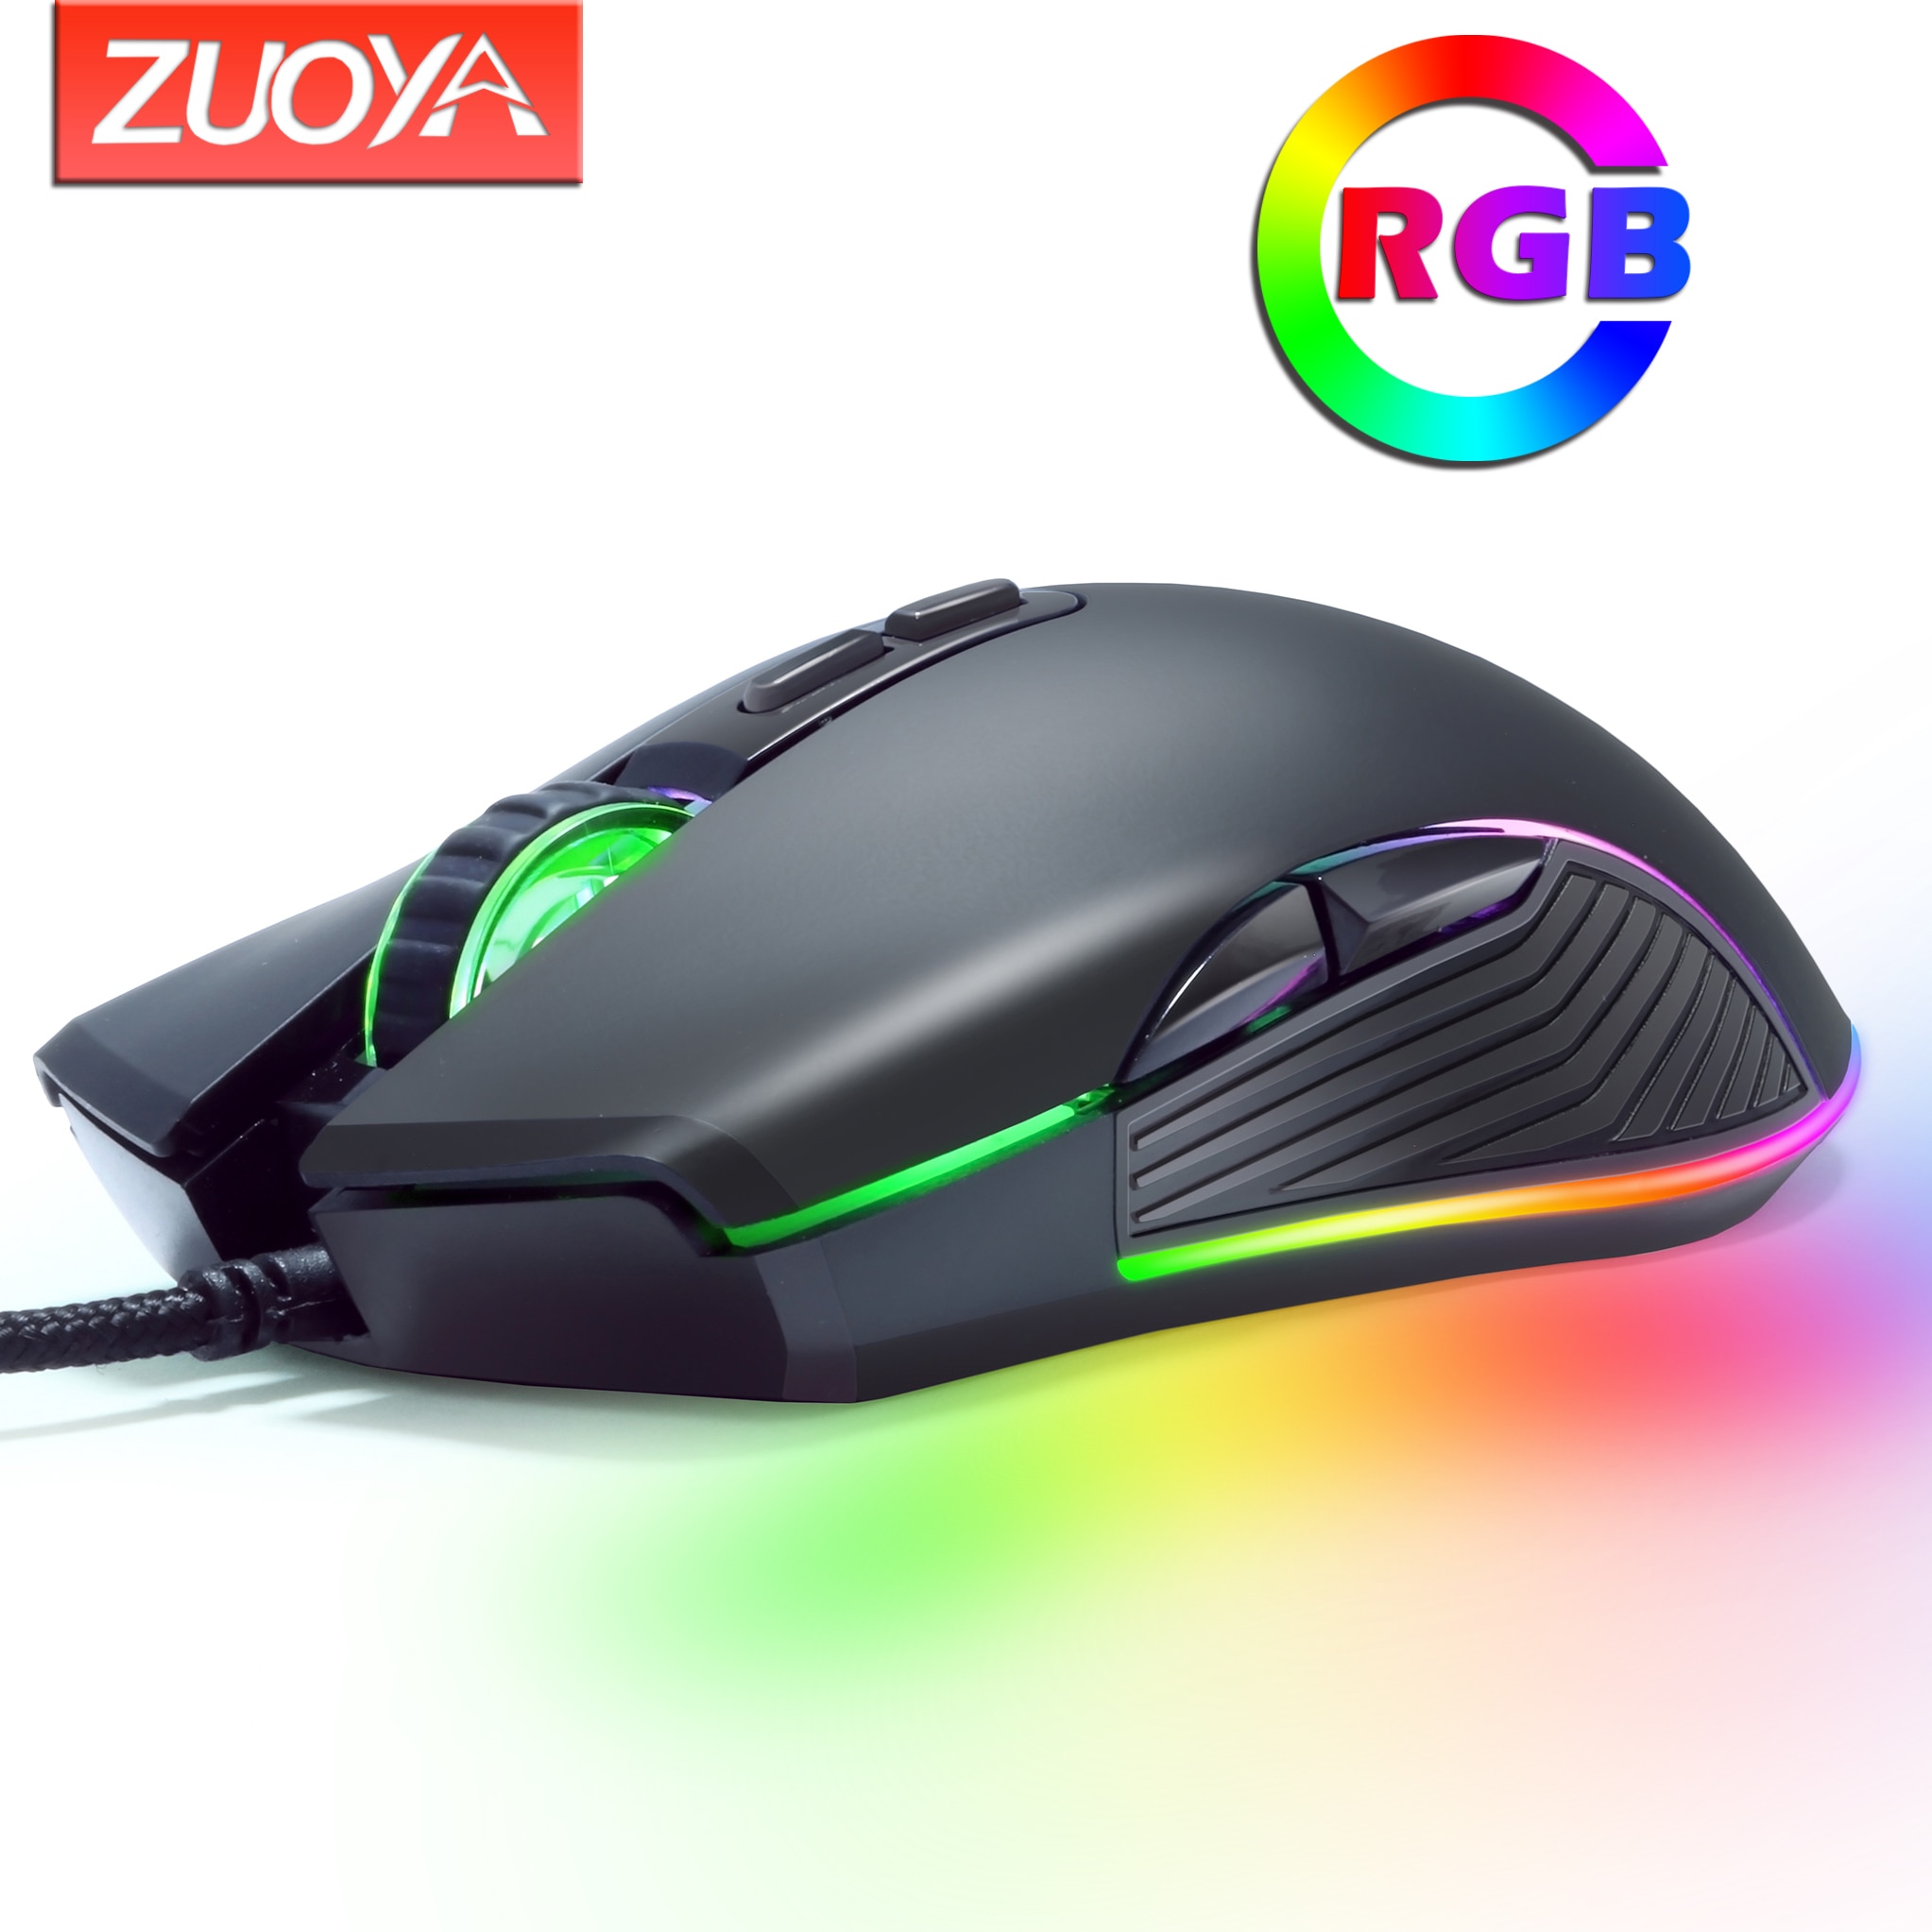 Original Wired RGB Gaming Mouse Optical Gamer Mice Adjustable DPI With Backlight For Laptop Computer PC Professional Game